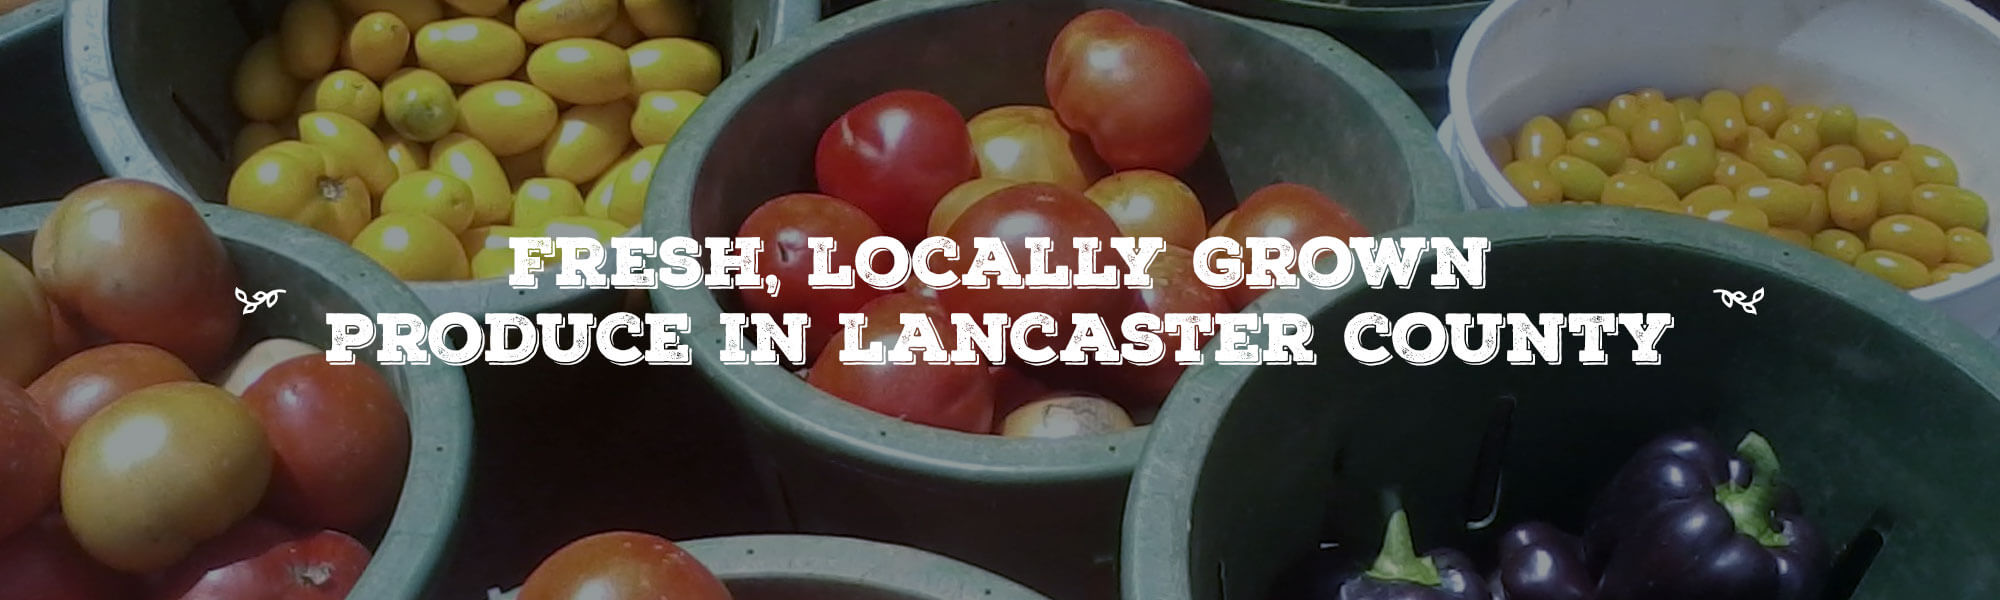 Fresh, Locally Grown Produce In Lancaster County overlay on image of baskets of a variety of different tomatoes